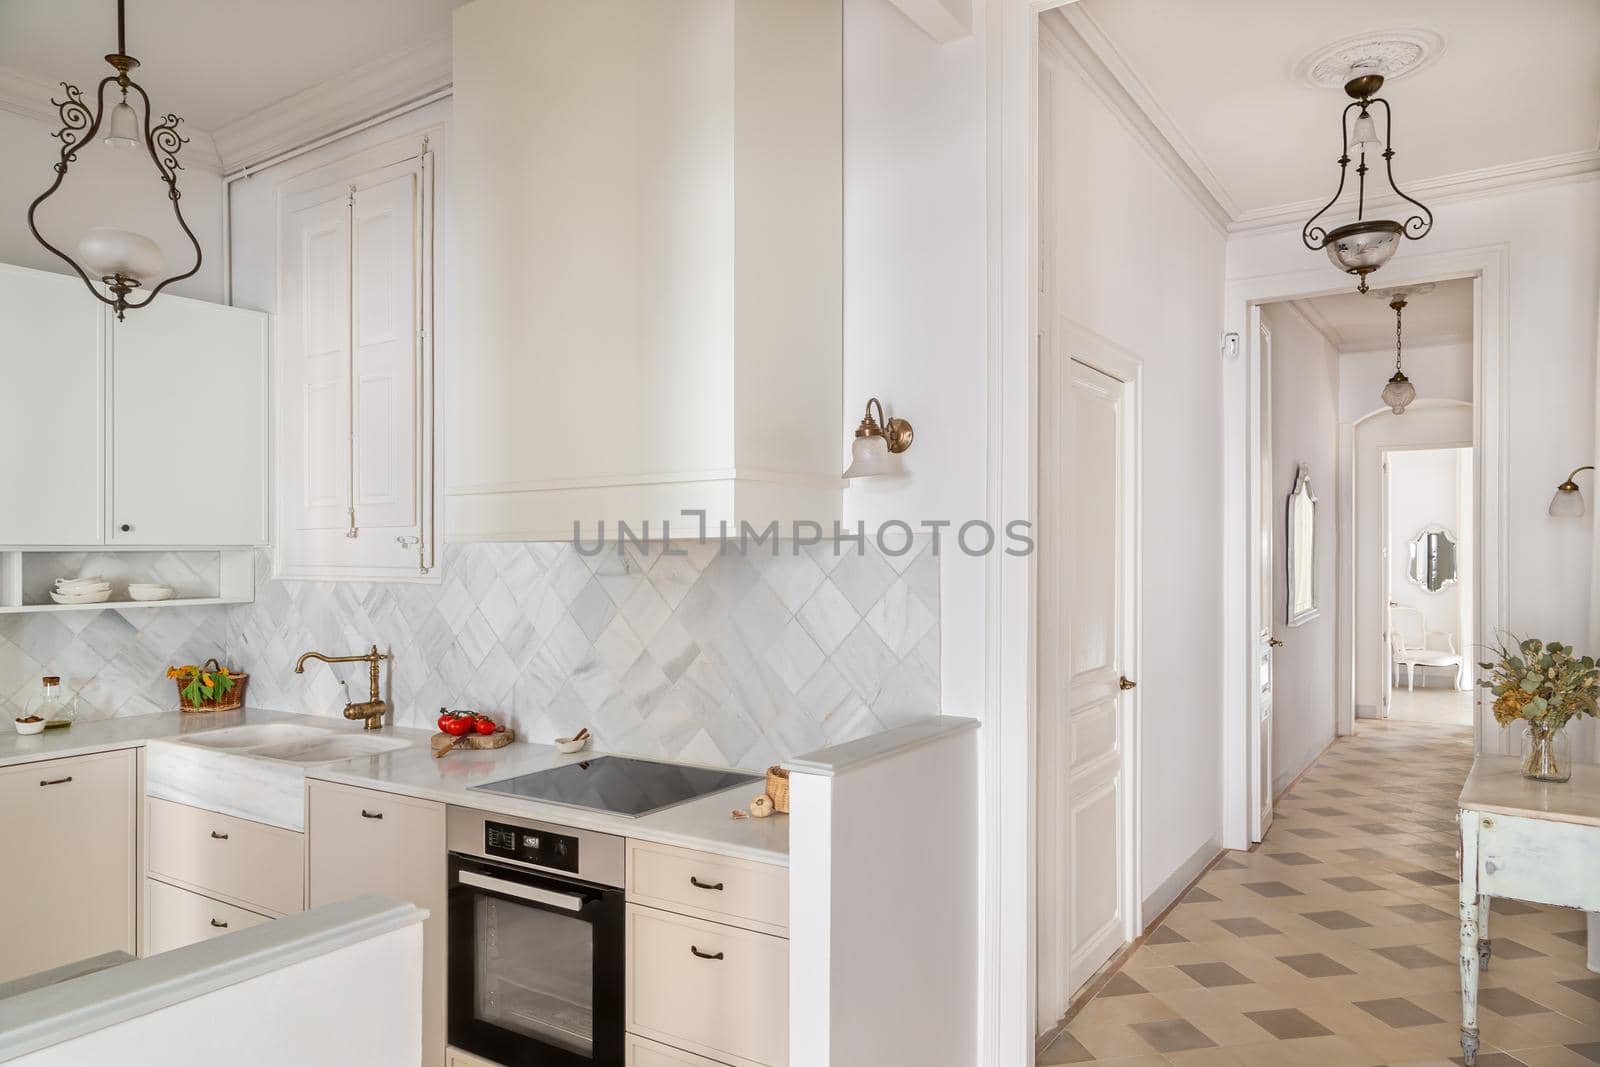 Hallway and kitchen with white furniture and tiles in bright cottage. Interior decorated in retro style with vintage chandeliers